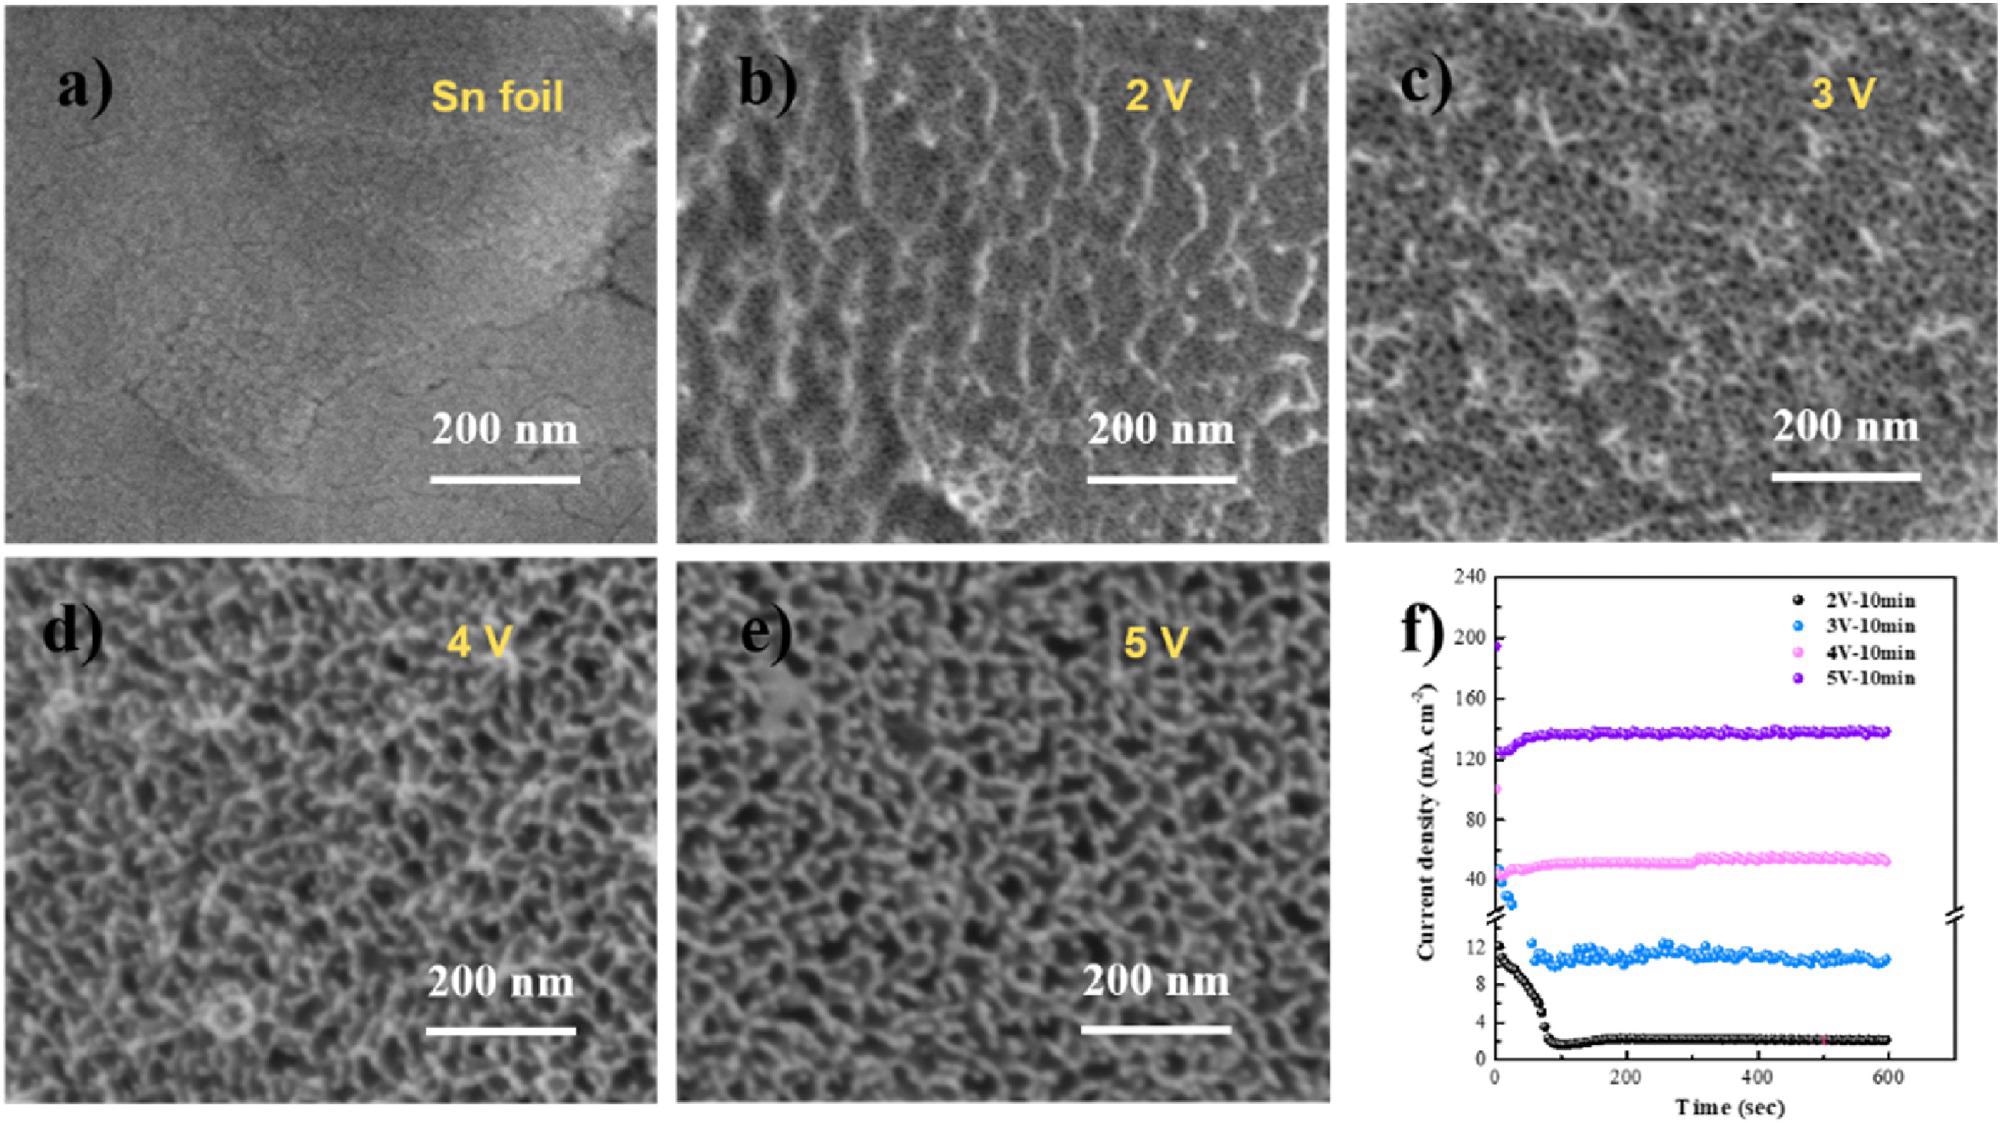 (a–e) SEM micrographs of Sn foil after anodization at various potentials in 1?M NaOH; (f) anodic oxidation i-t curves at various potentials in 1?M NaOH.